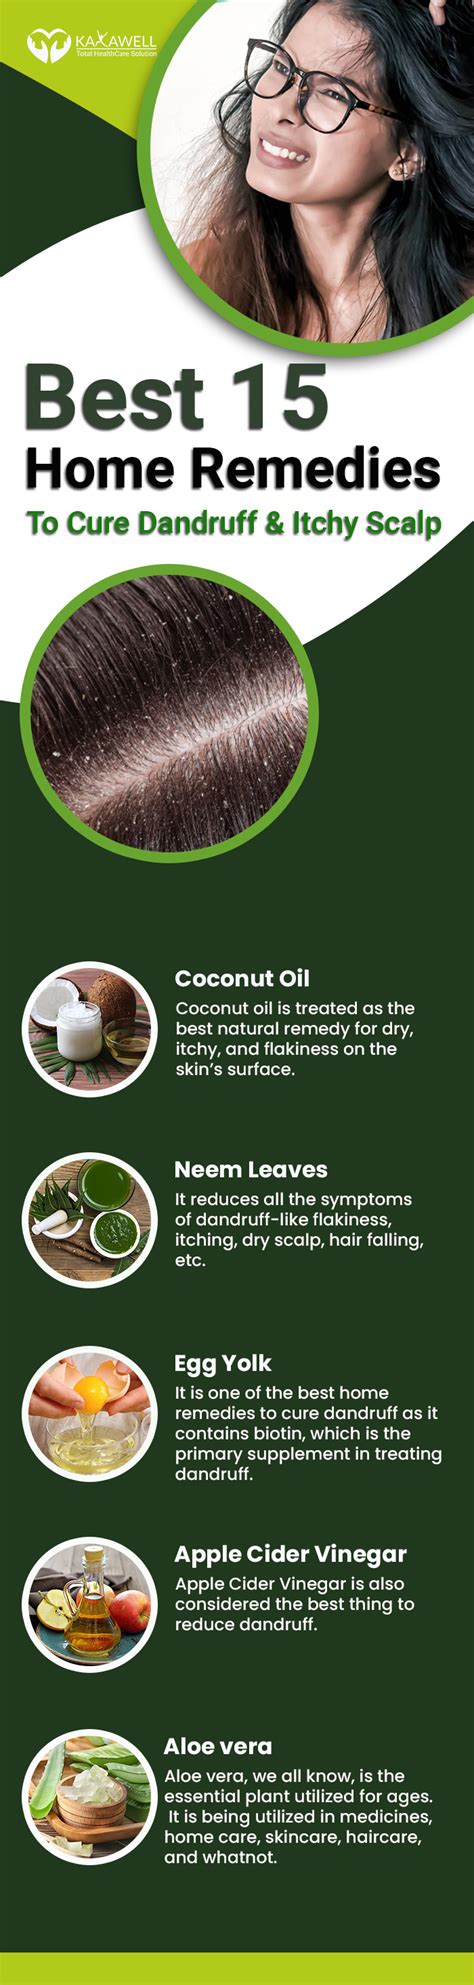 Best 15 Home Remedies To Cure Dandruff And Itchy Scalp Interestpin